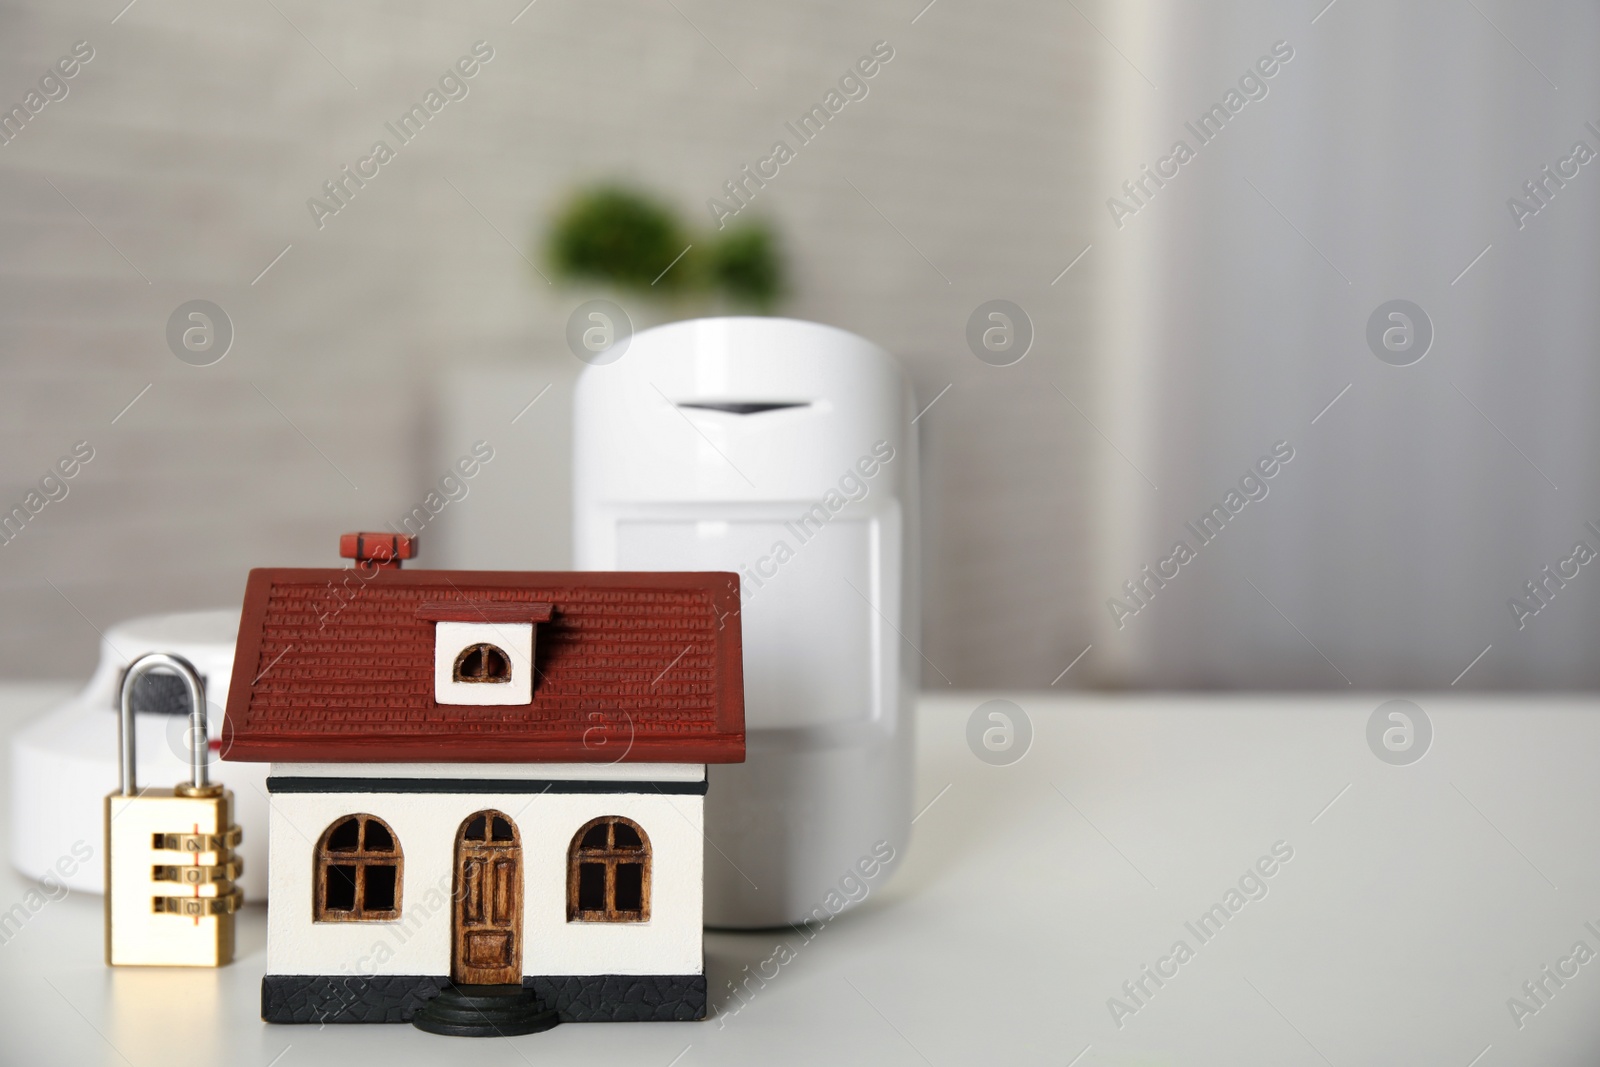 Photo of House model, lock, smoke and movement detectors on table in room, space for text. Home security system